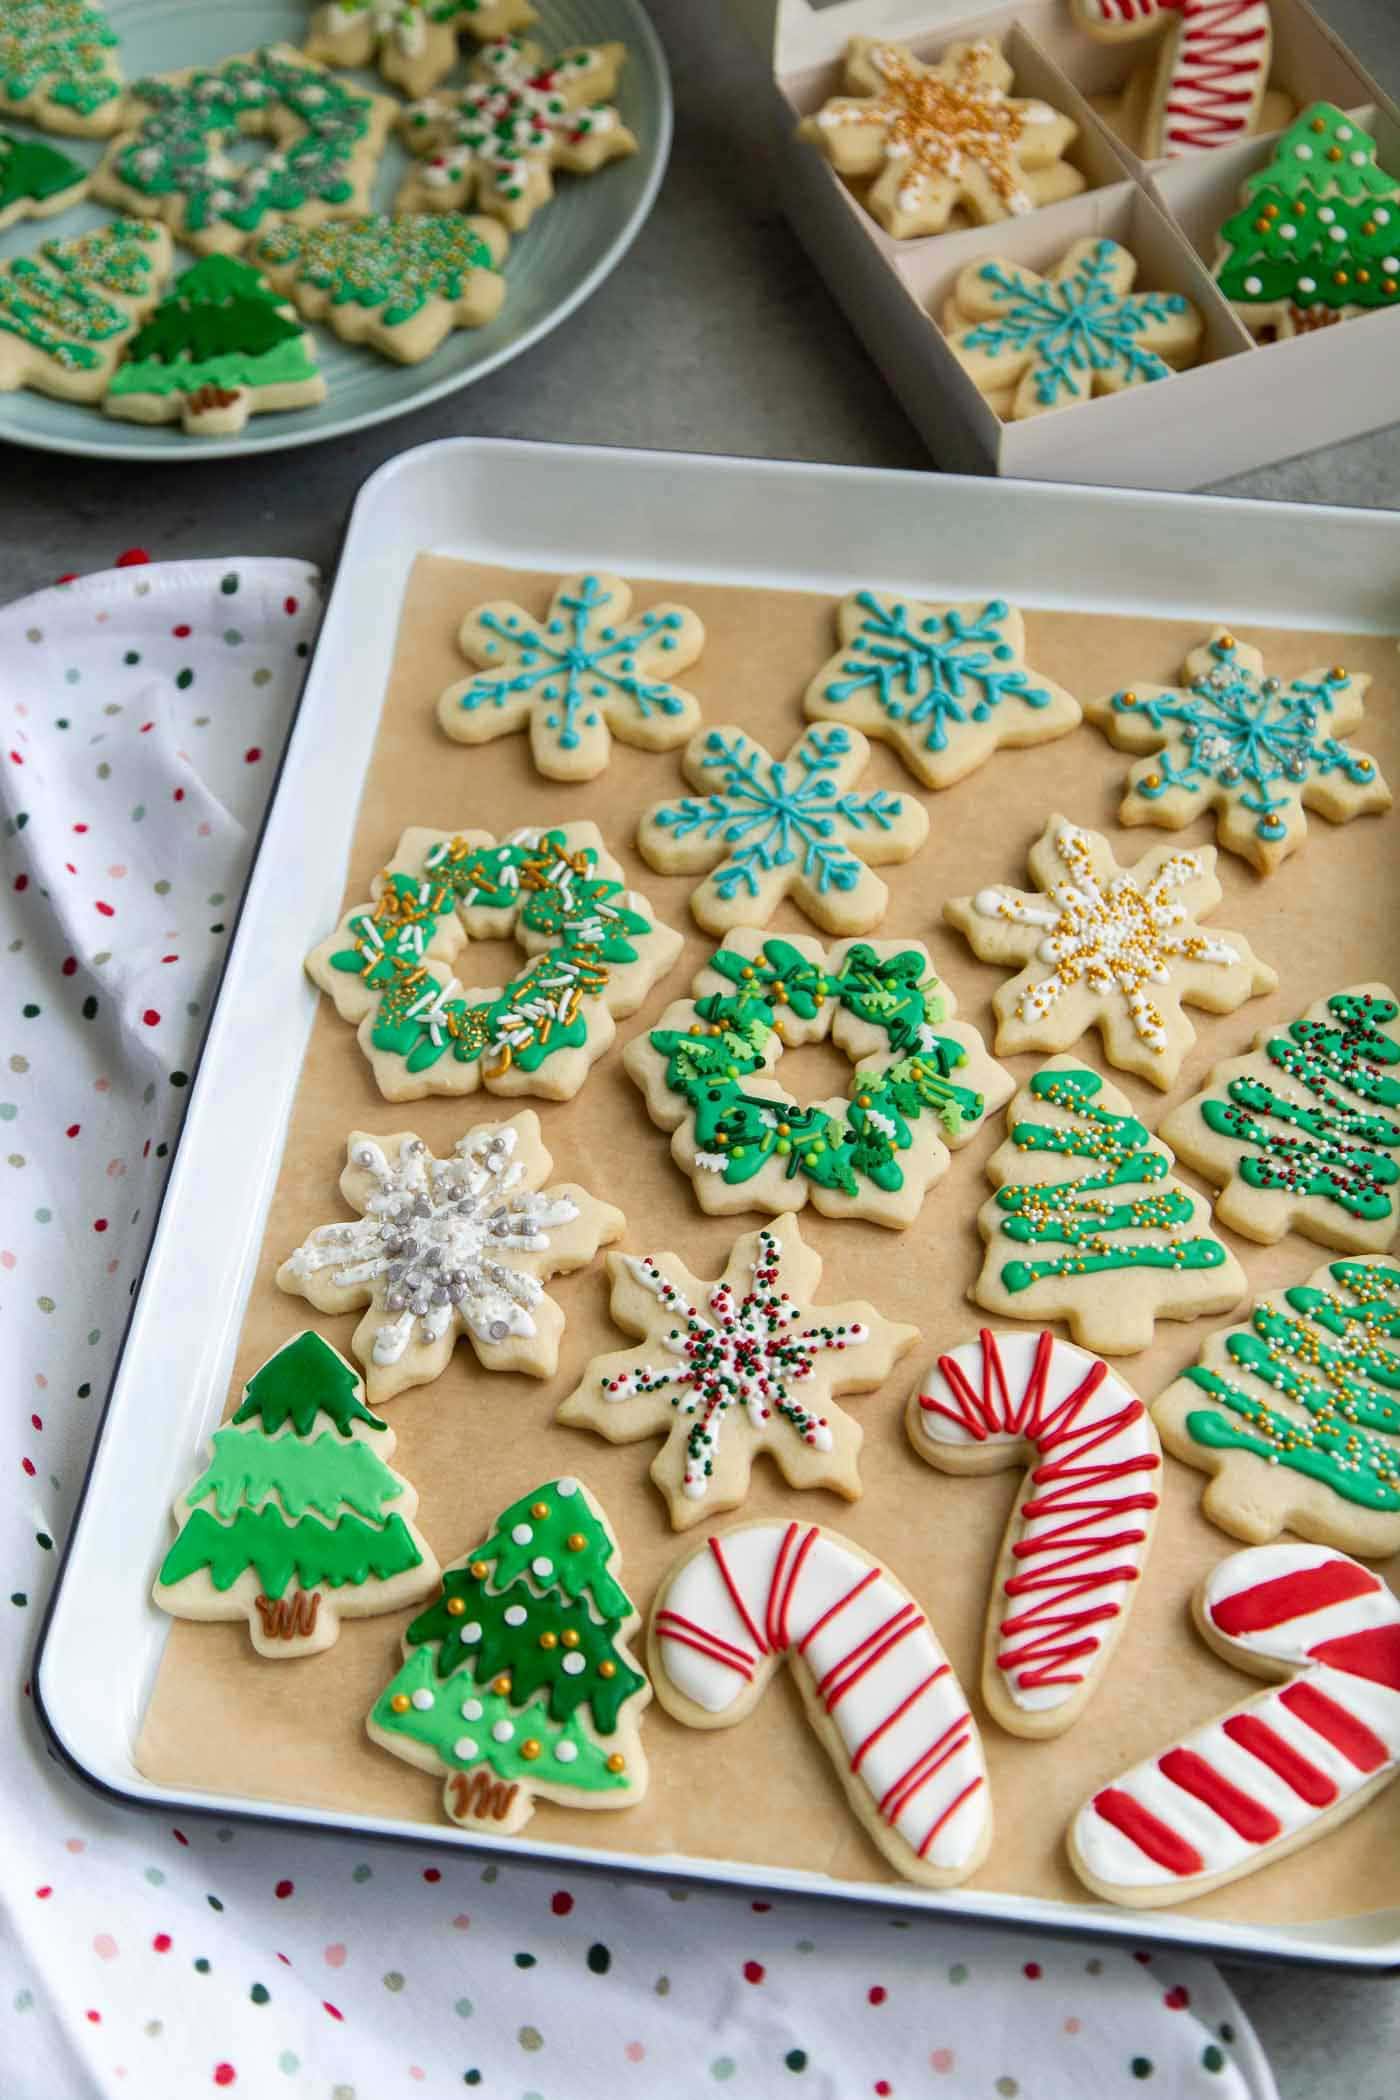 https://www.thelittleepicurean.com/wp-content/uploads/2020/11/decorated-holiday-sugar-cookies-1.jpg